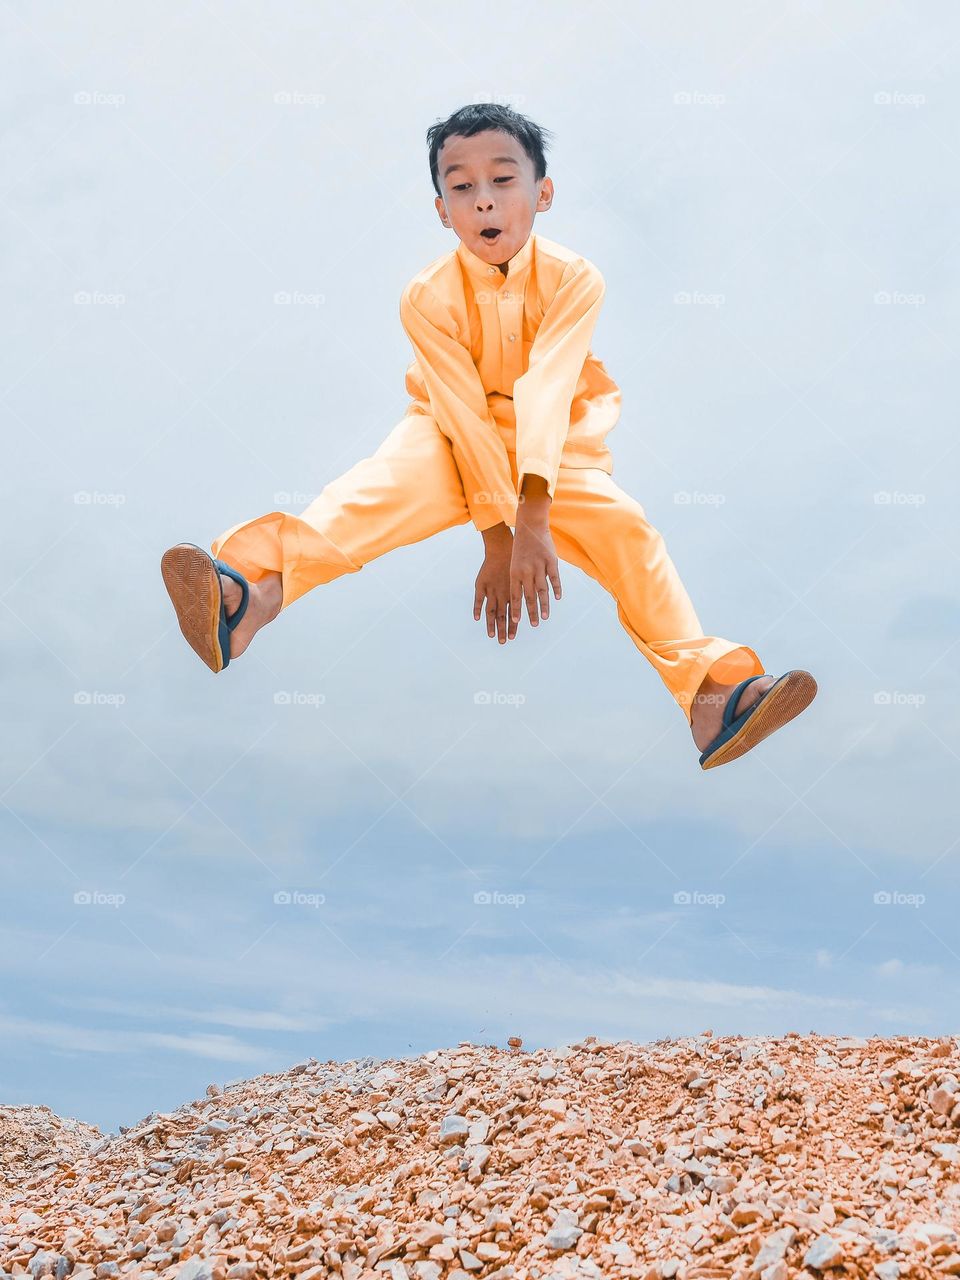 A boy in yellow jumping on sand dunes on a sunny day